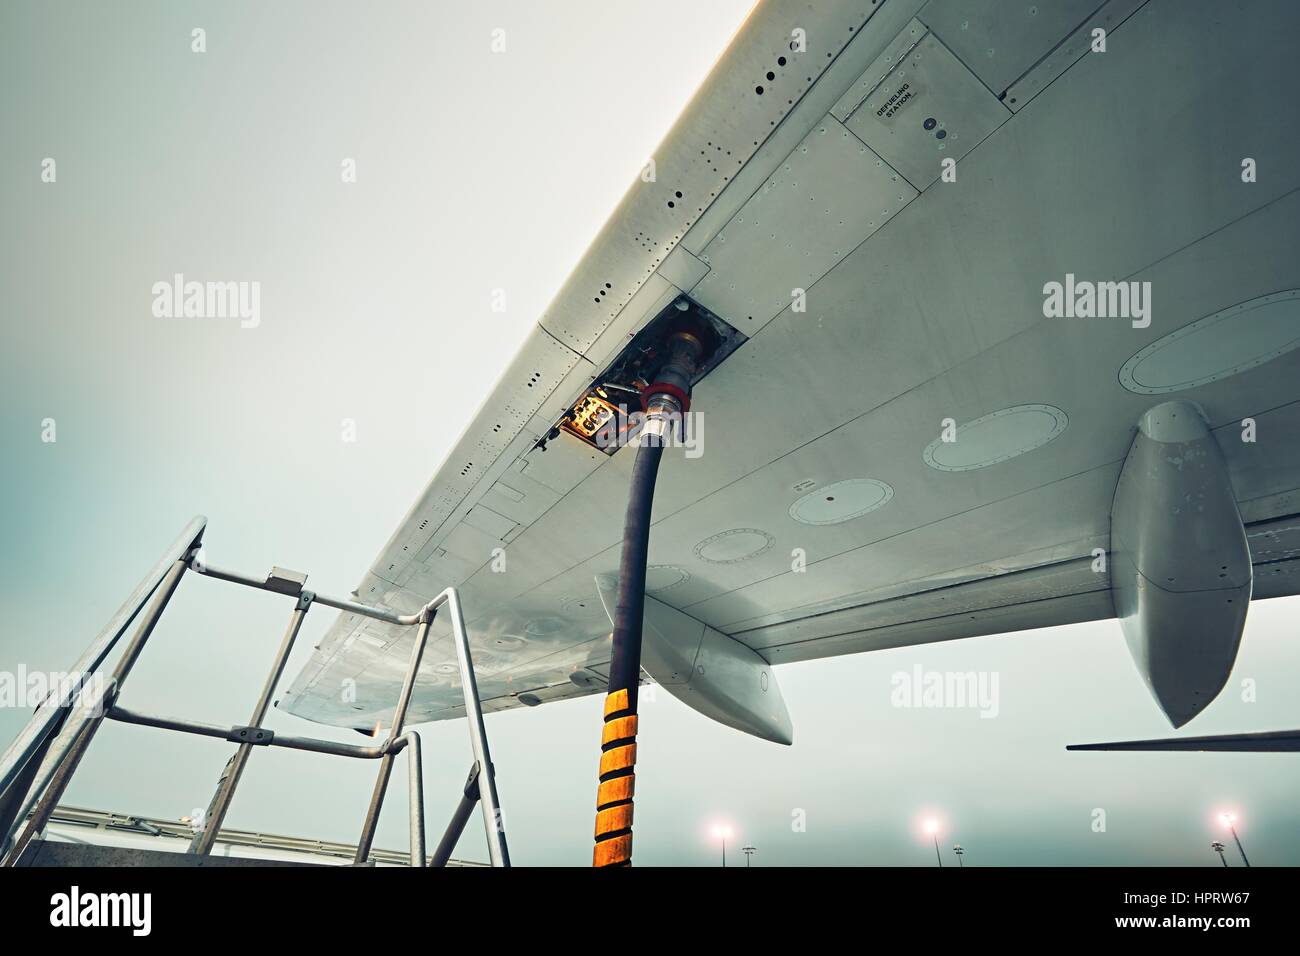 Process of the refueling passenger plane at the airport Stock Photo